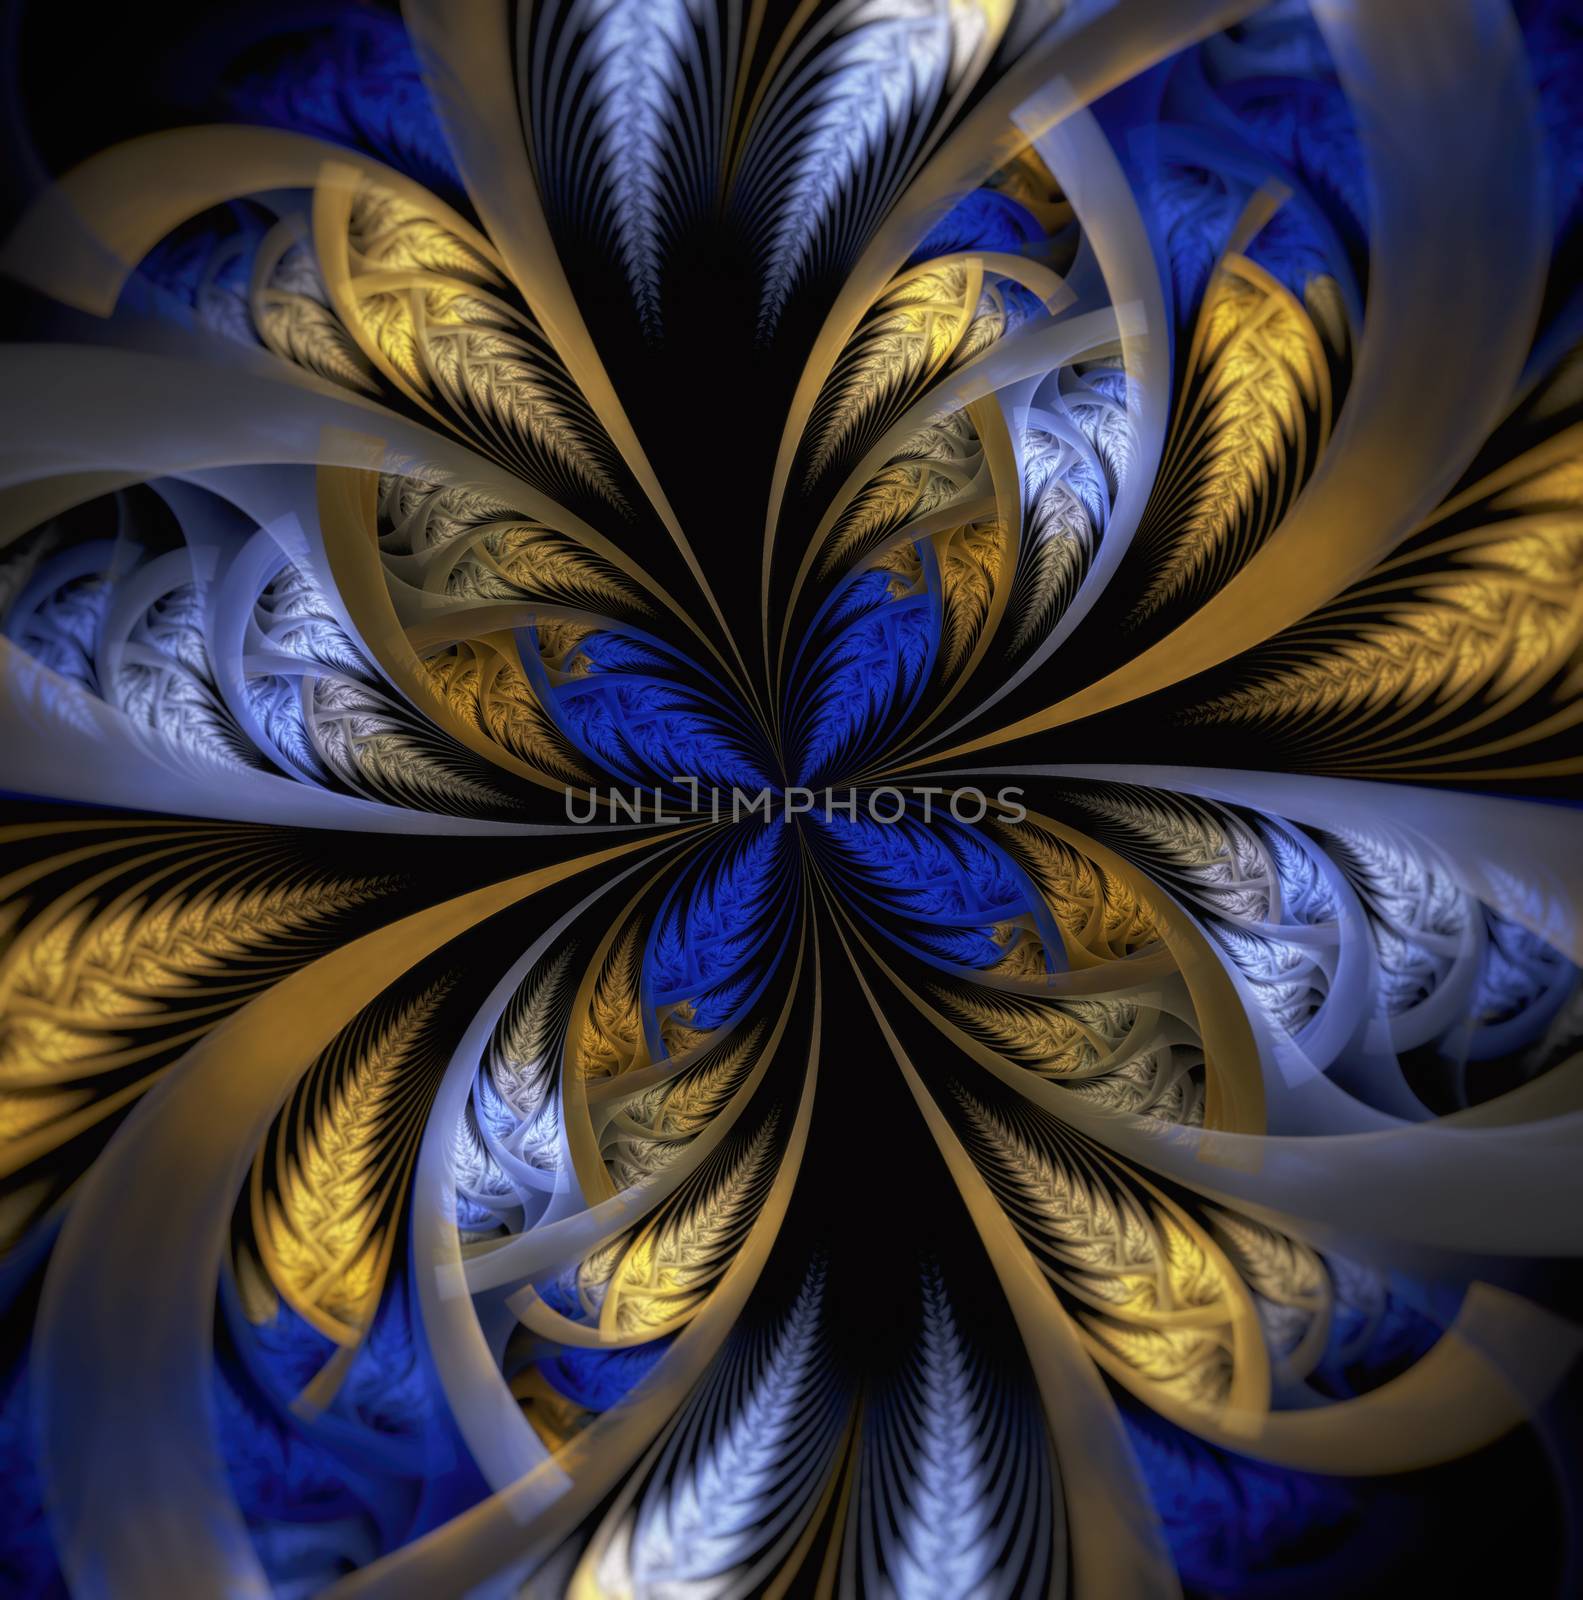 Computer generated fractal artwork for design, art and entertainment